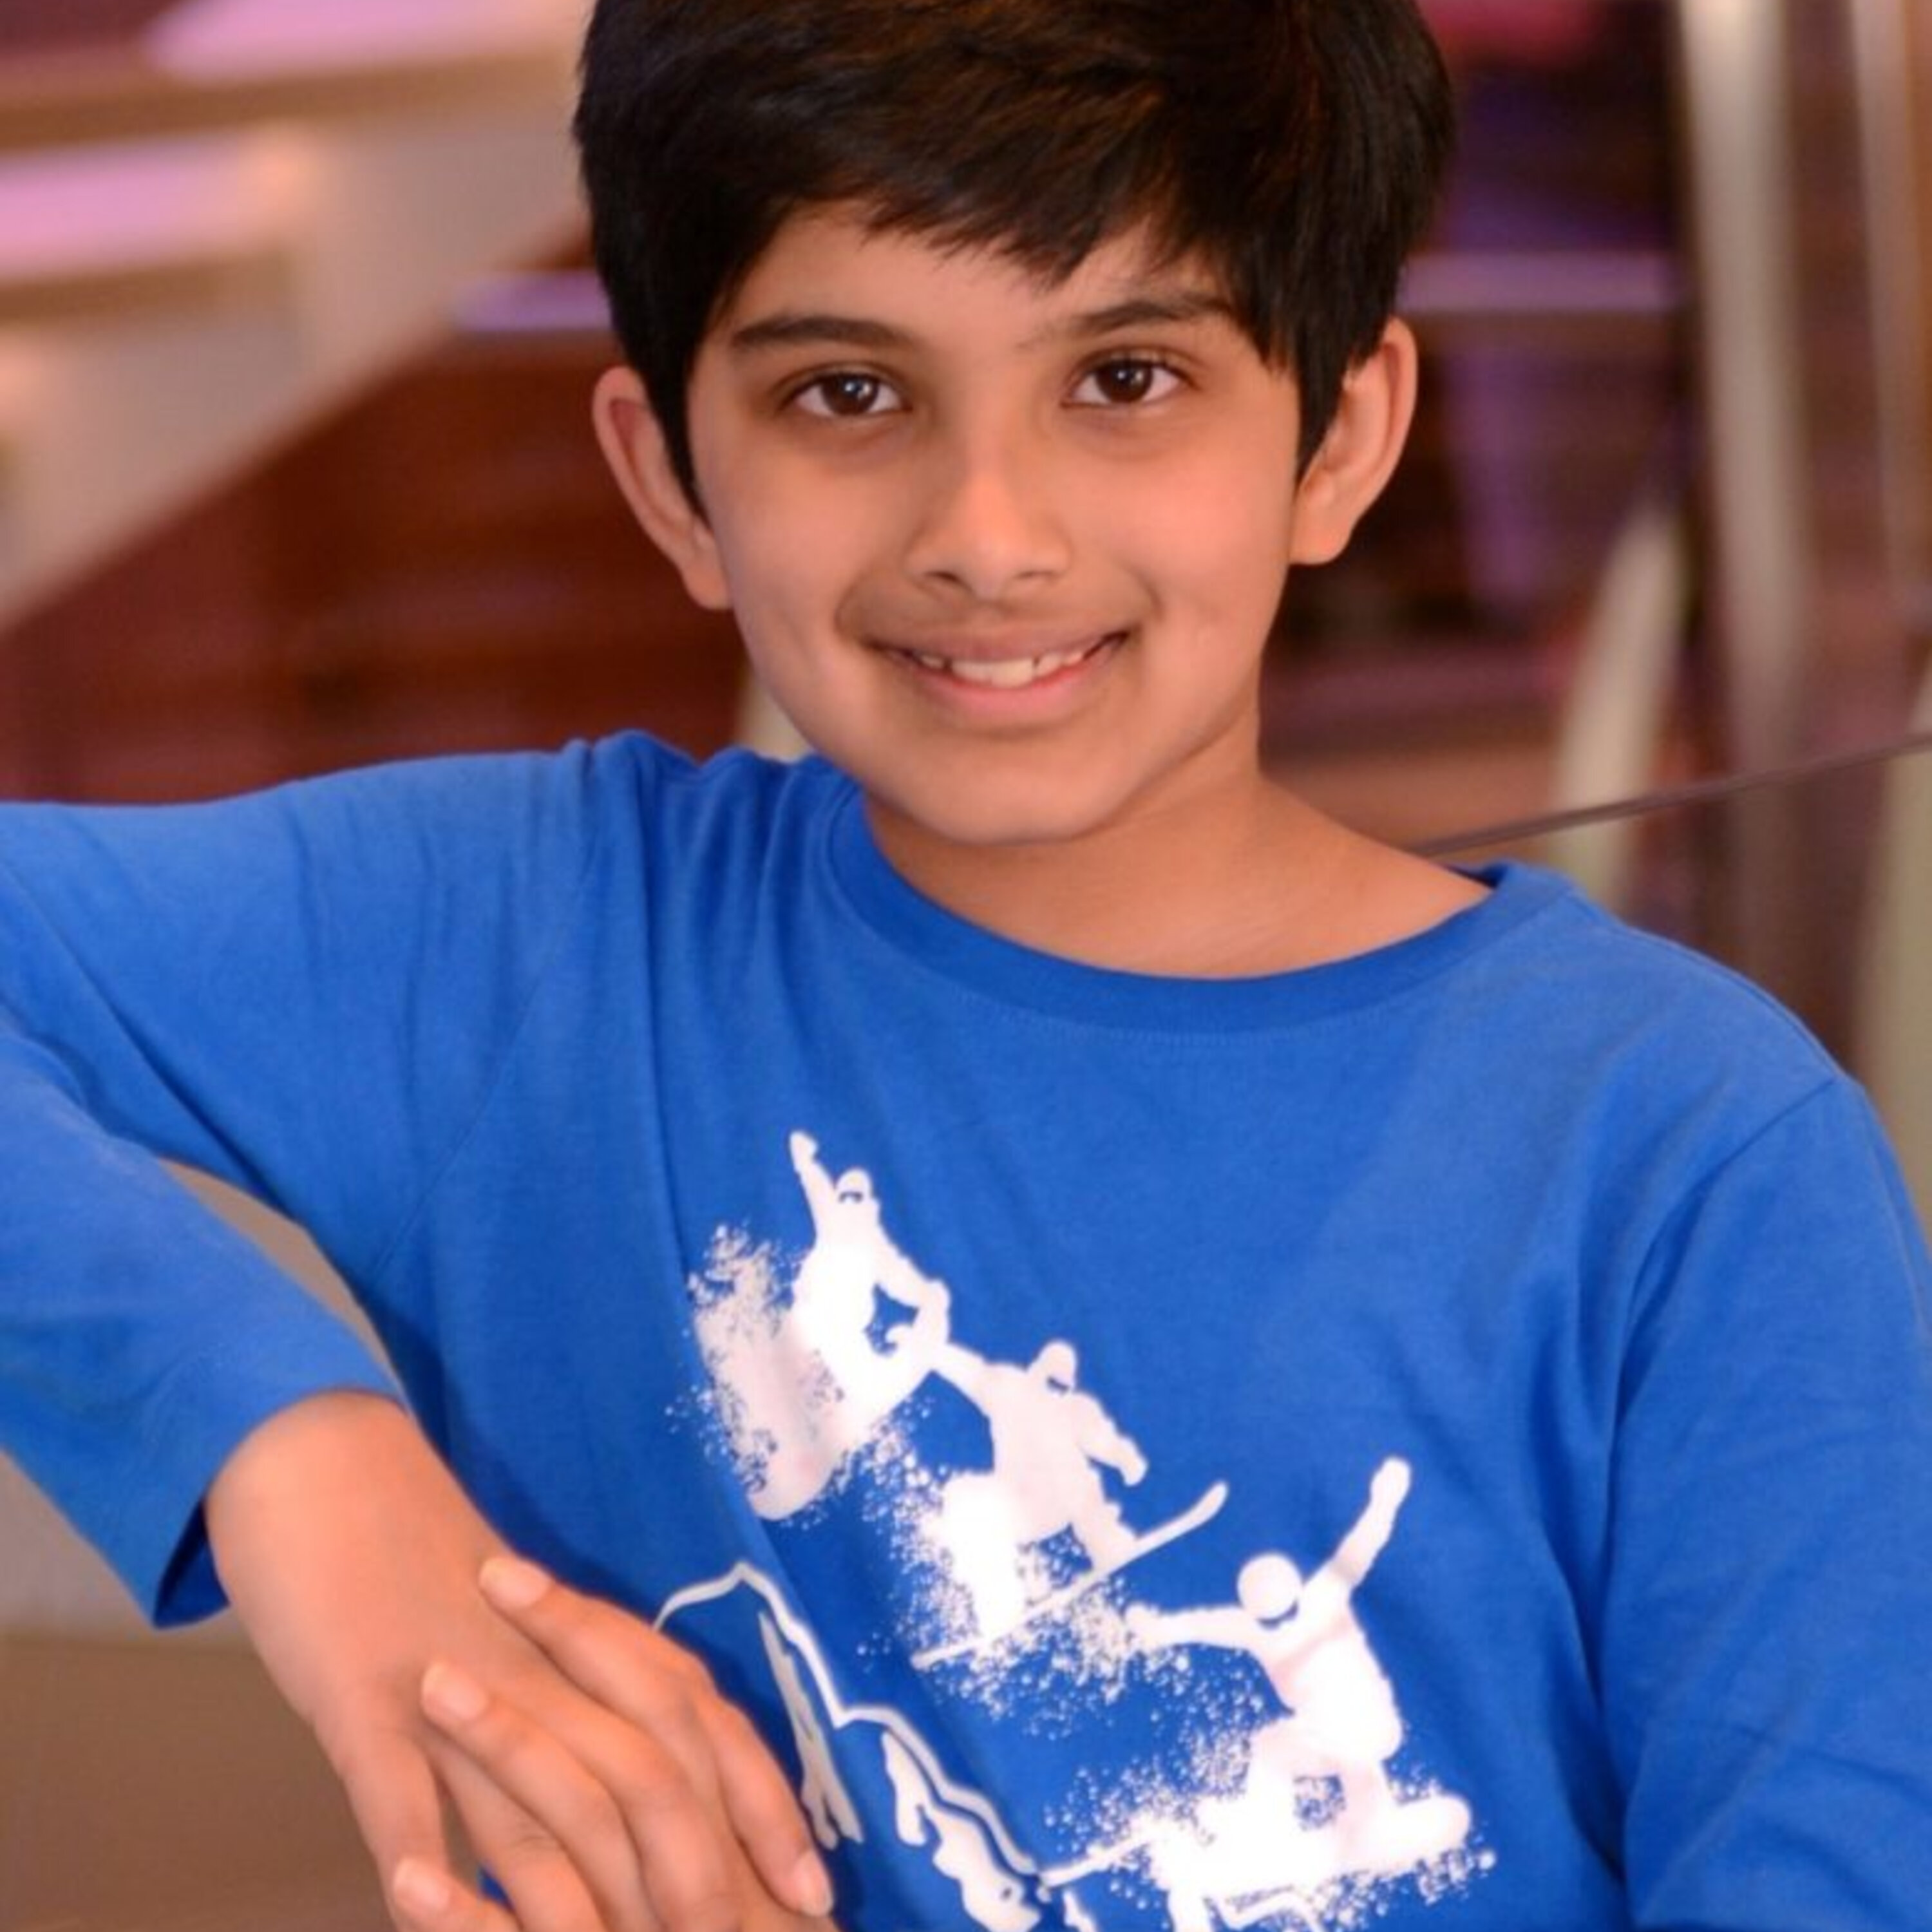 Money and Me: The 12-year old investor whose passion touched over a million lives